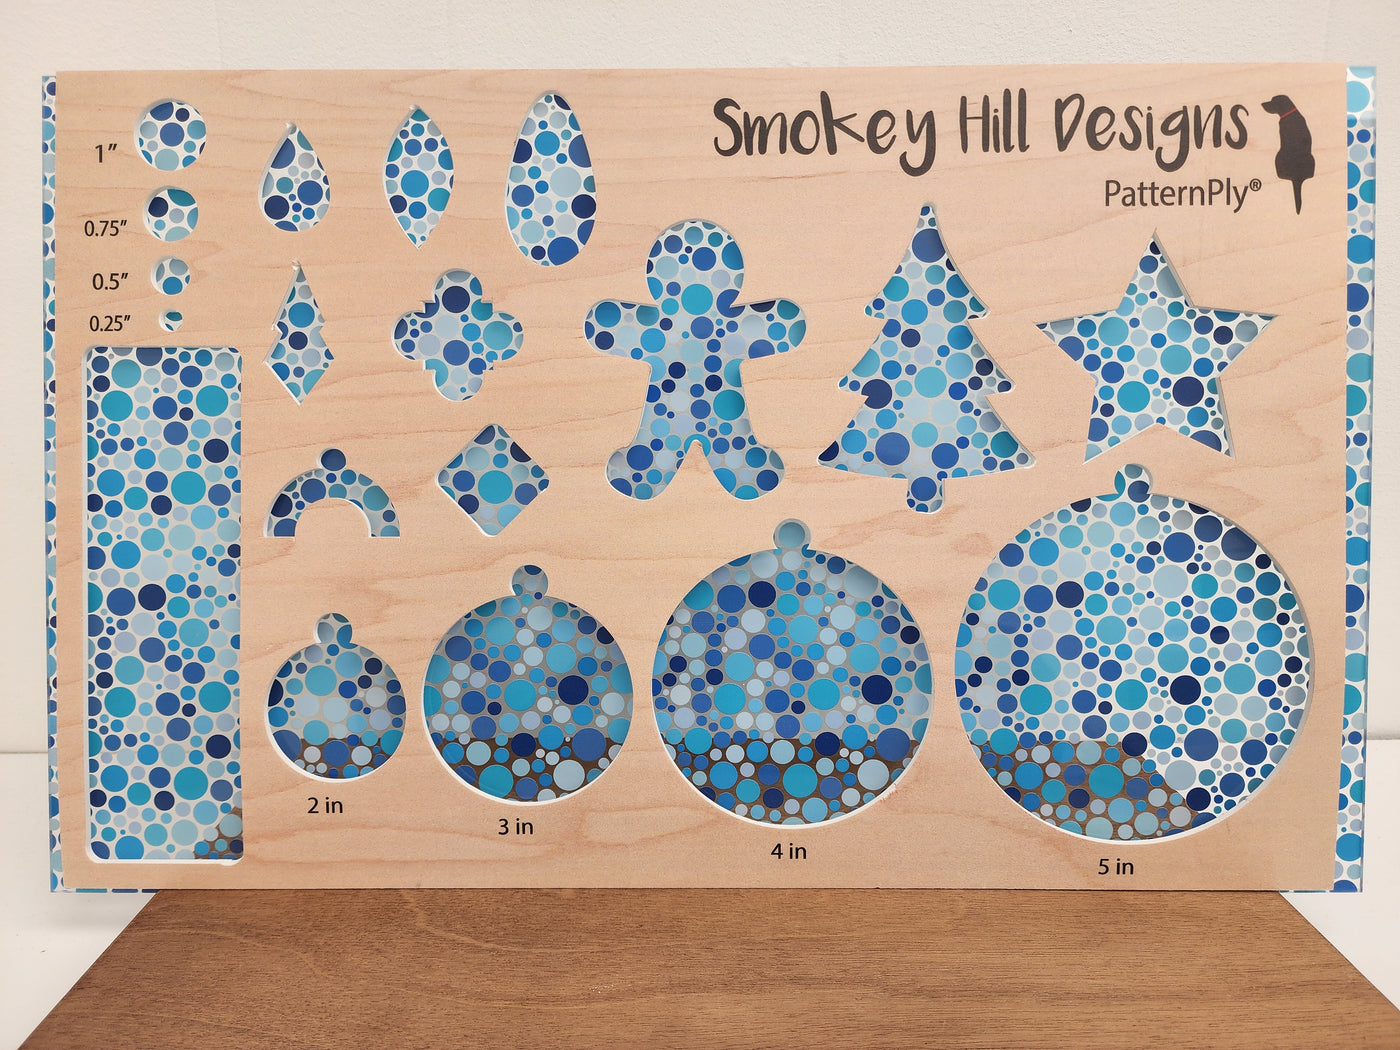 PatternPly® Scattered Large Blue Bubbles